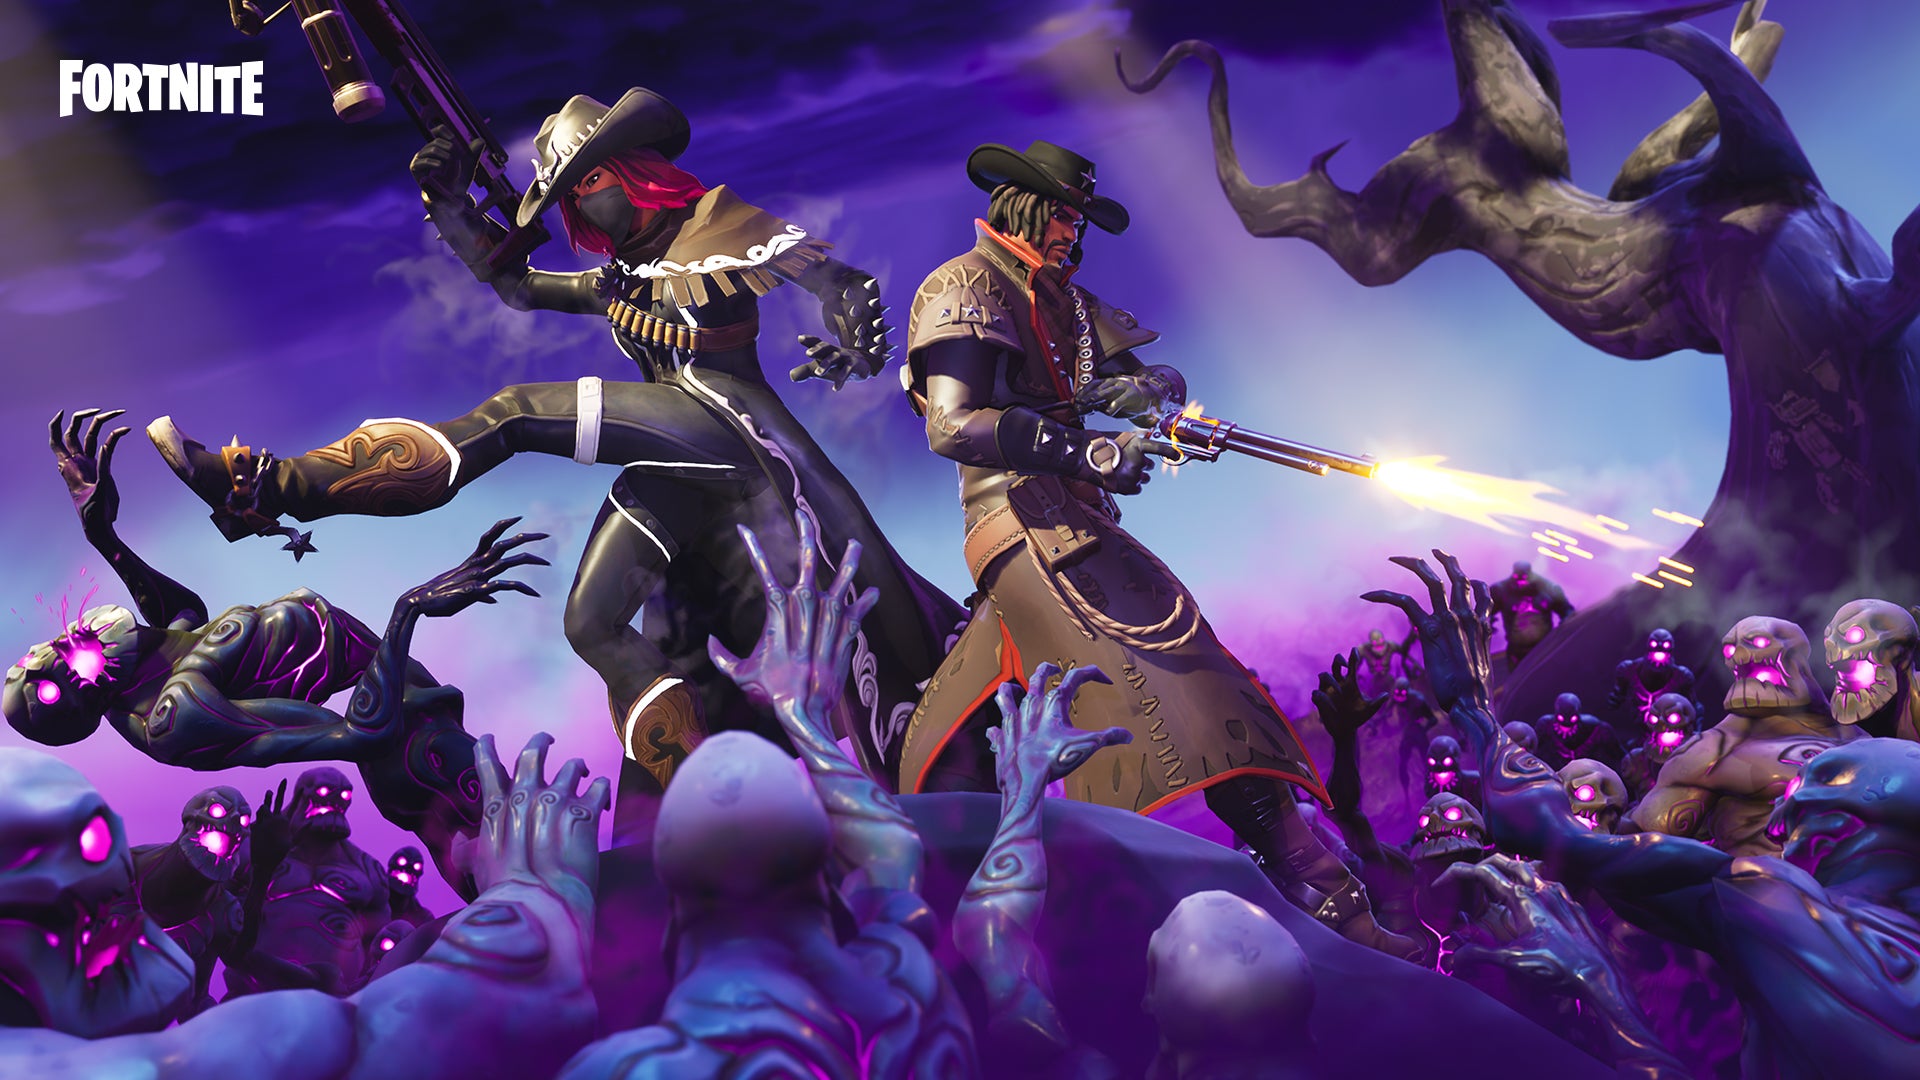 Image for Fortnite patch v6.22 adds Heavy Assault Rifle, Team Terror and Blitz LTEs